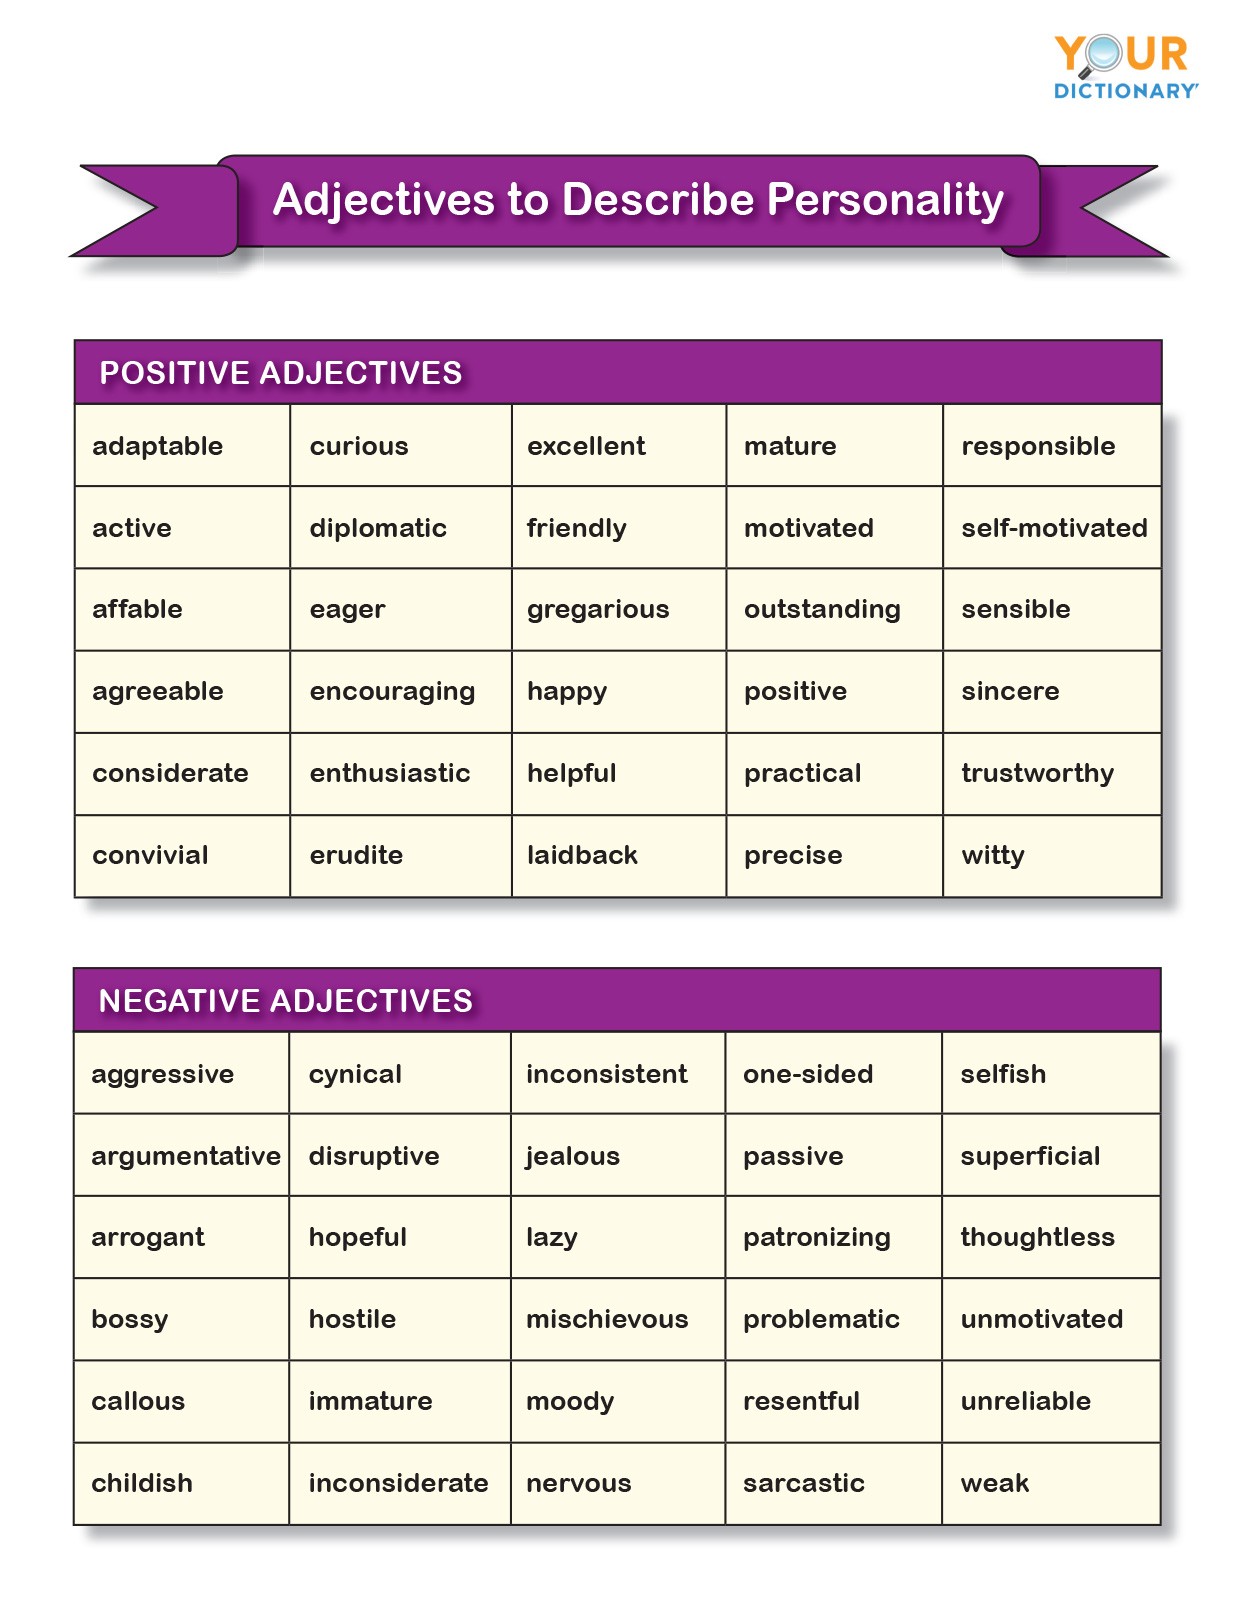 Adjectives to Describe Personality